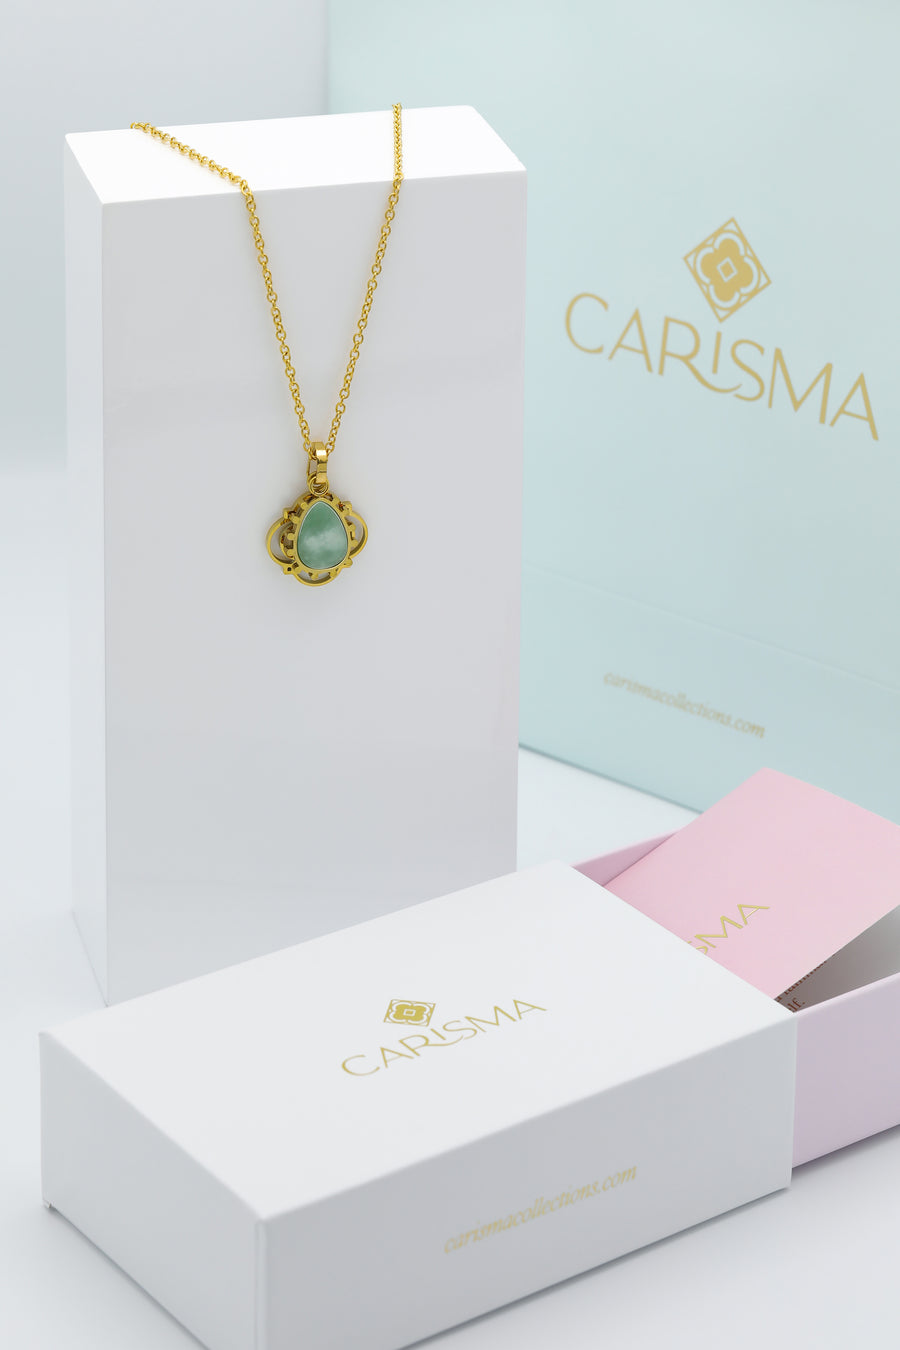 Prickly Pear Green Stone Pendant & Small Carisma Logo Hollow Necklace Gift Set